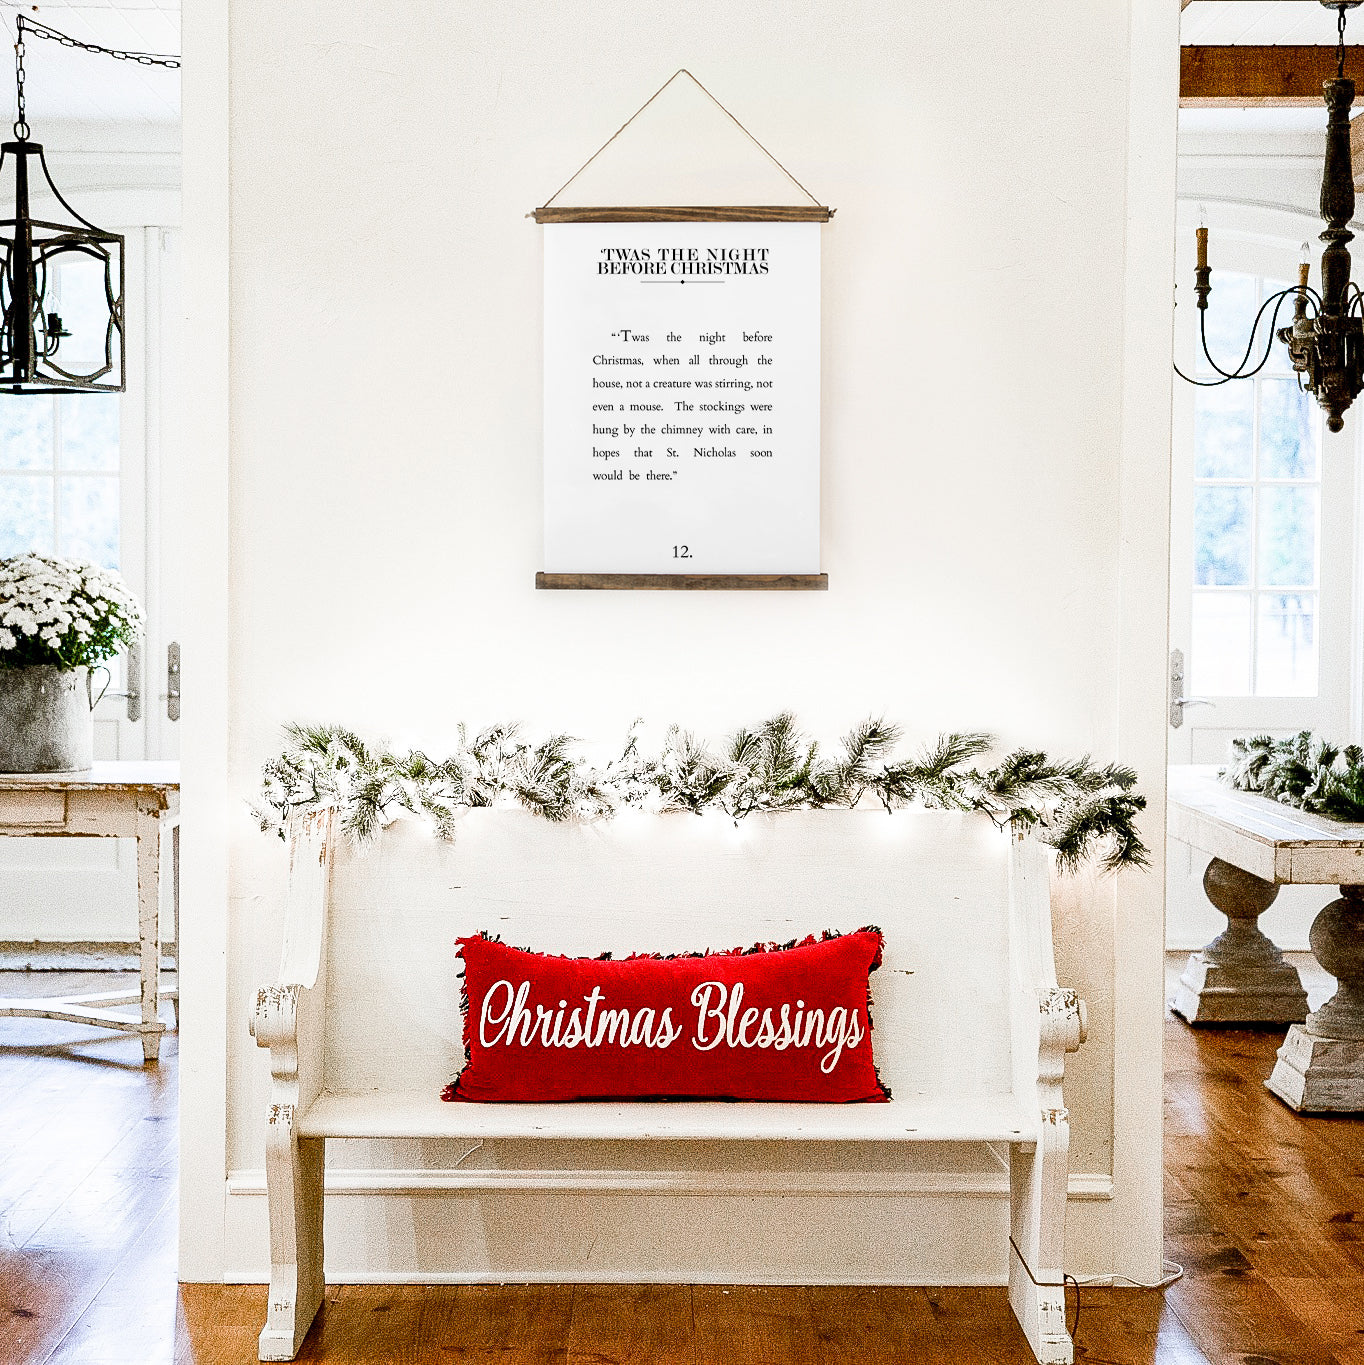 Smallwoods canvas sign, with "Twas the Night Before Christmas" and the first 2 lines of the poem printed on hanging canvas.